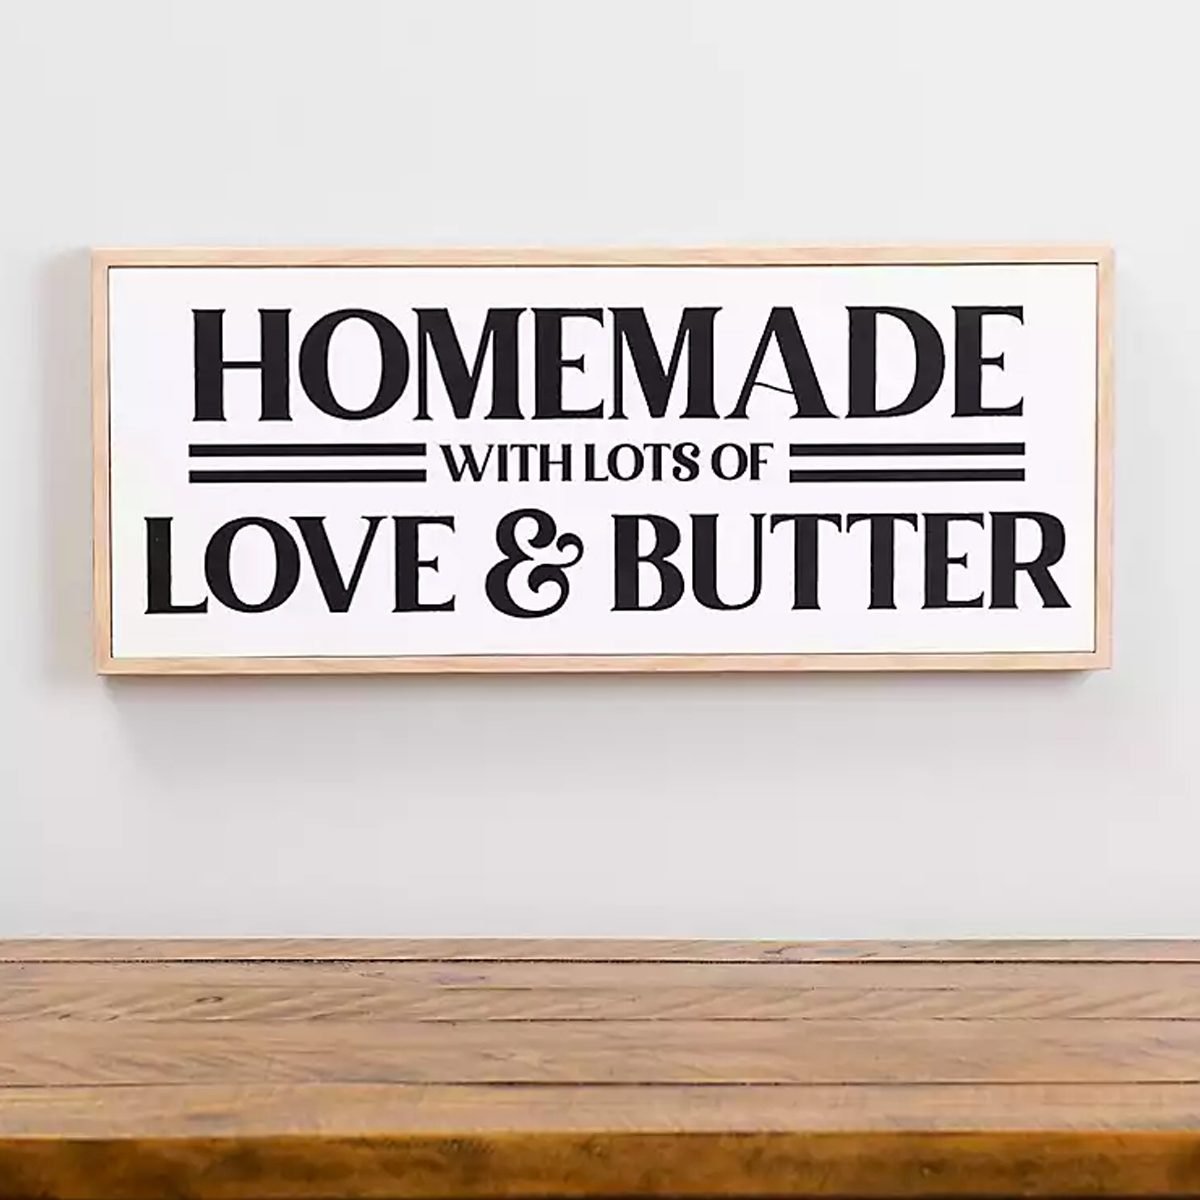 Farmhouse Kitchen Decor, Funny Kitchen Signs, Dishes Are Looking